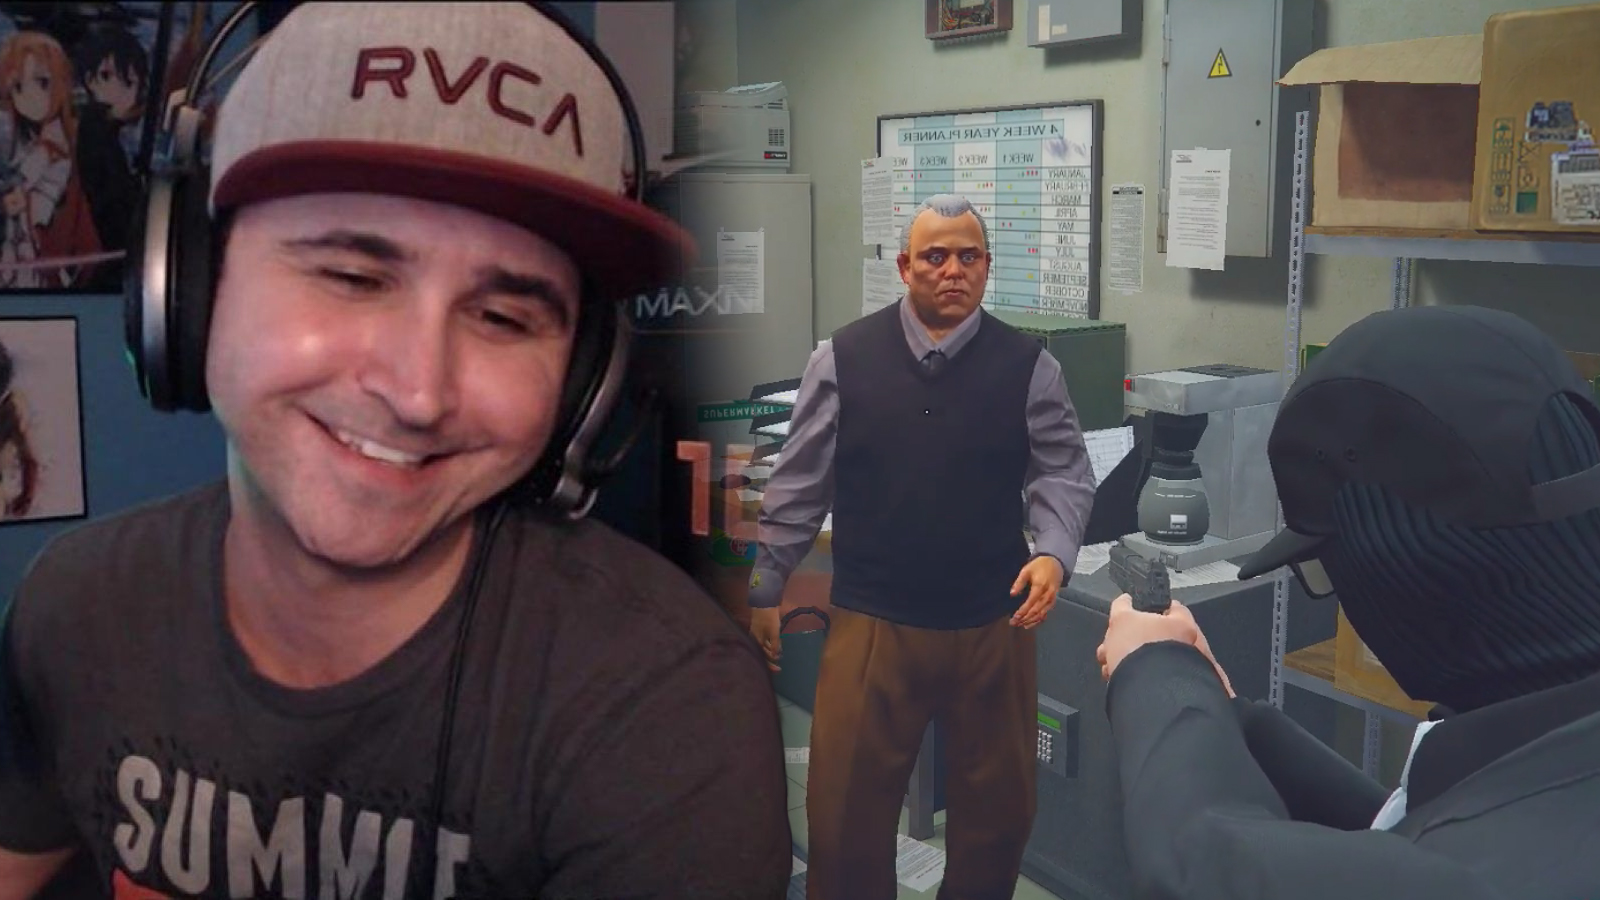 Twitch and Rockstar team up to gift GTA RP viewers 600,000 subs - Dexerto